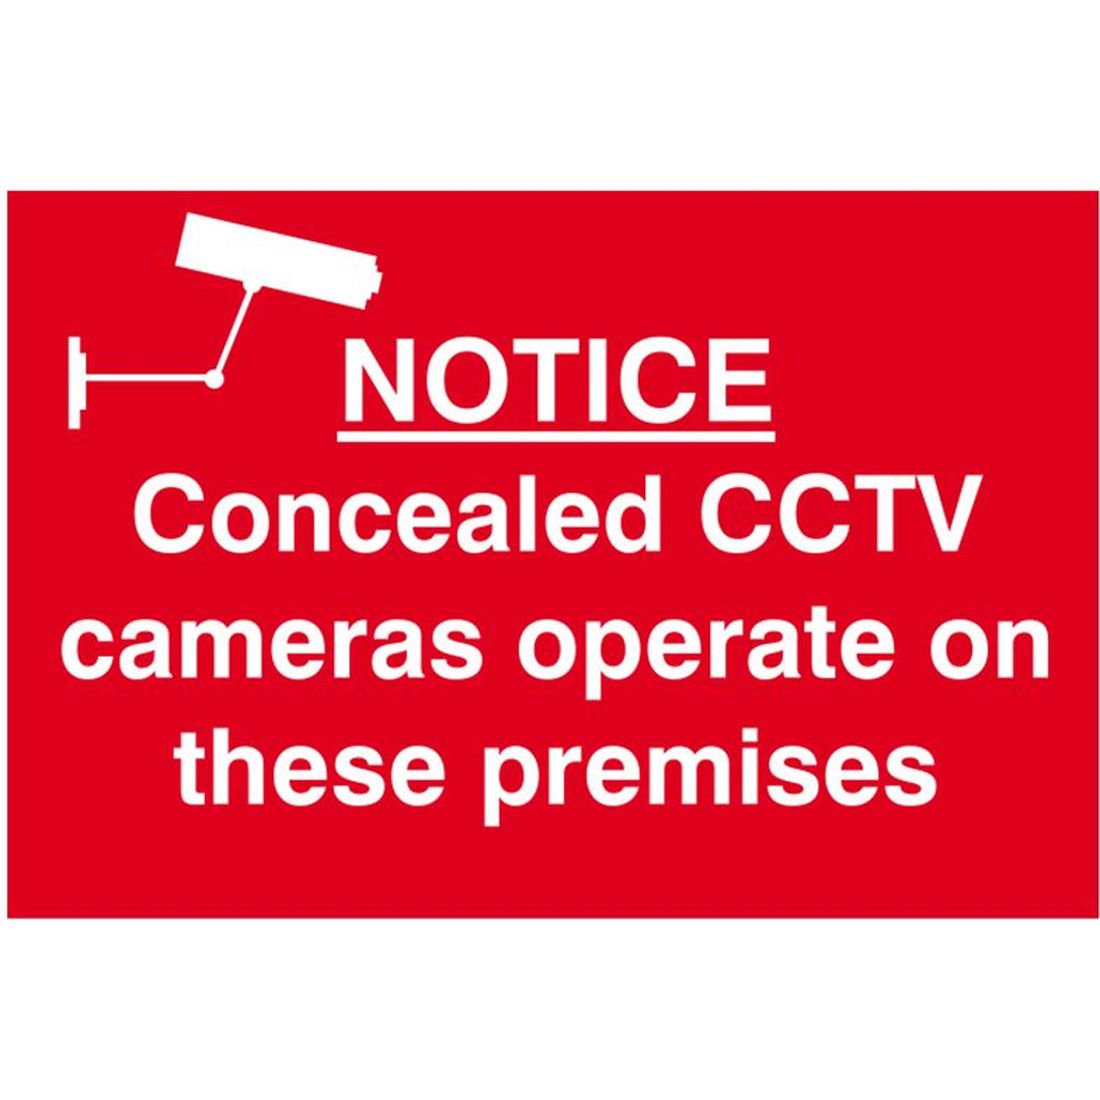 Scan Notice Concealed CCTV Cameras Operate On These Premises - PVC 300 x 200mm       